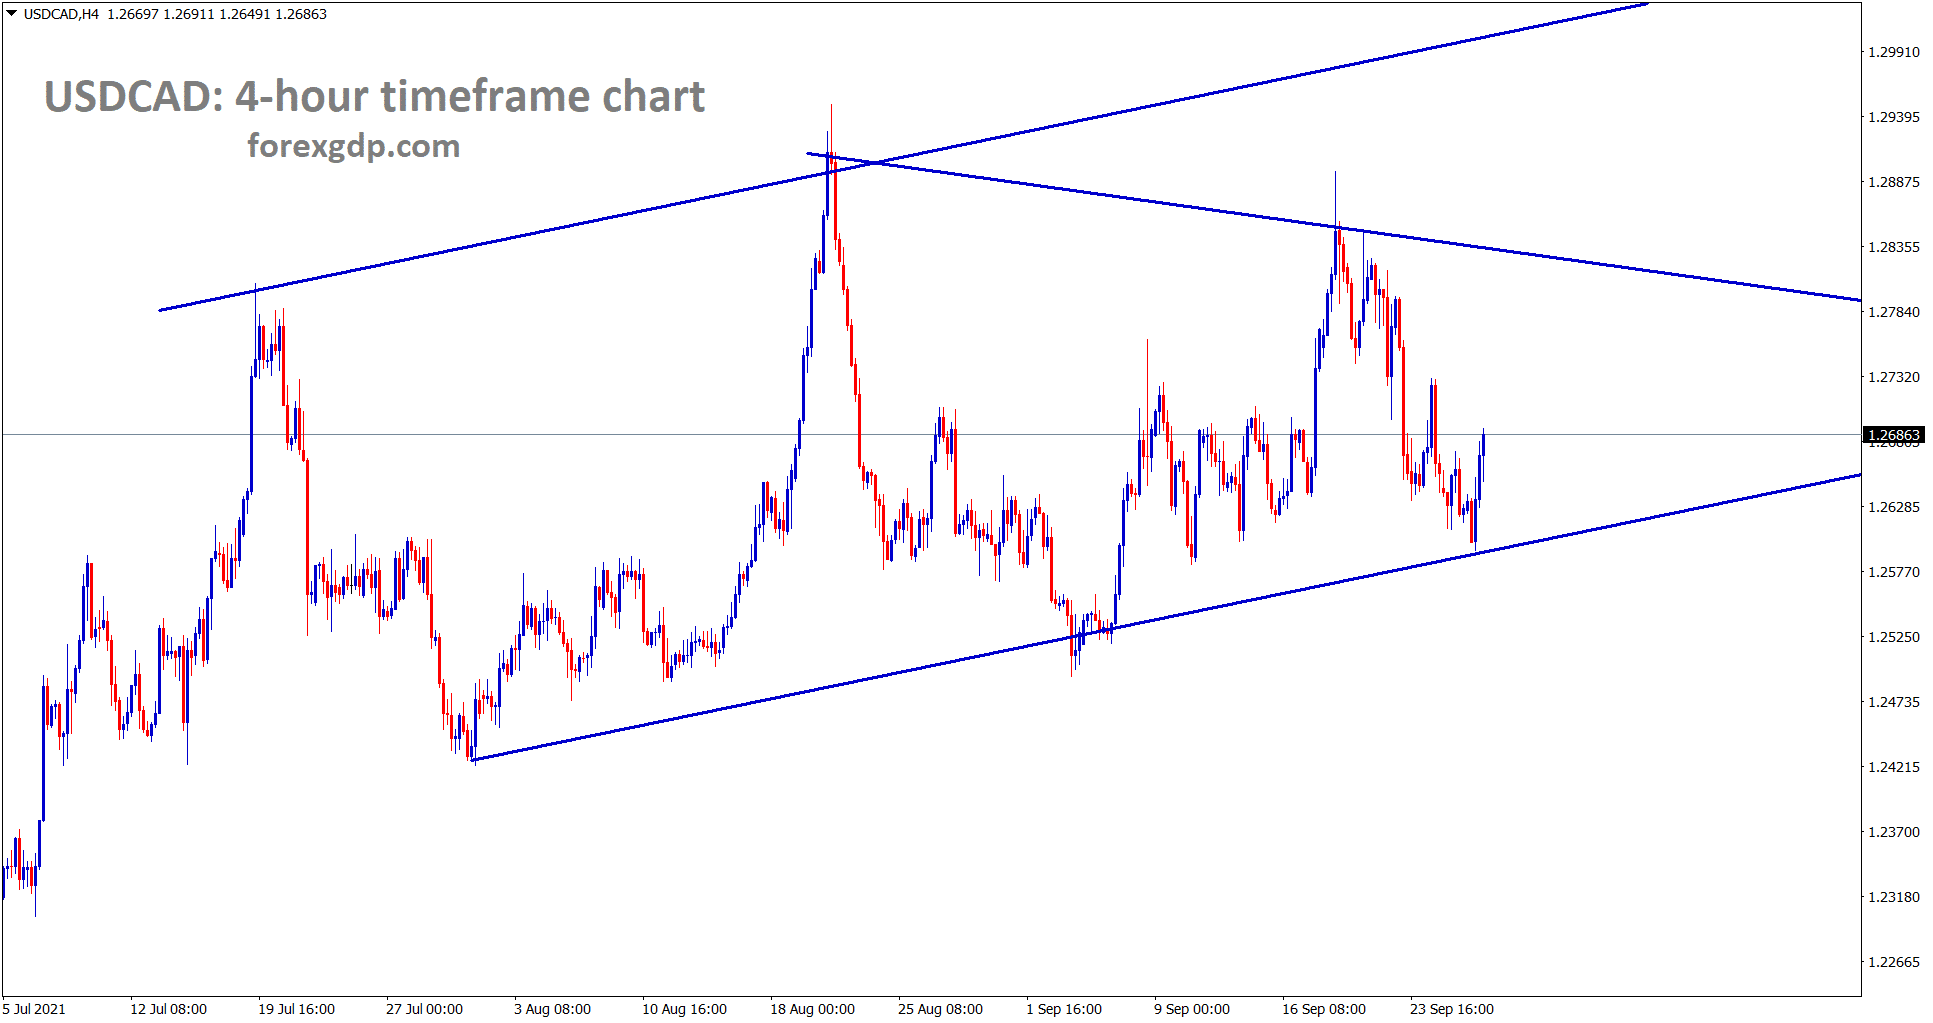 USDCAD is rebounding from the higher low area of the uptrend line and the symmetrical triangle